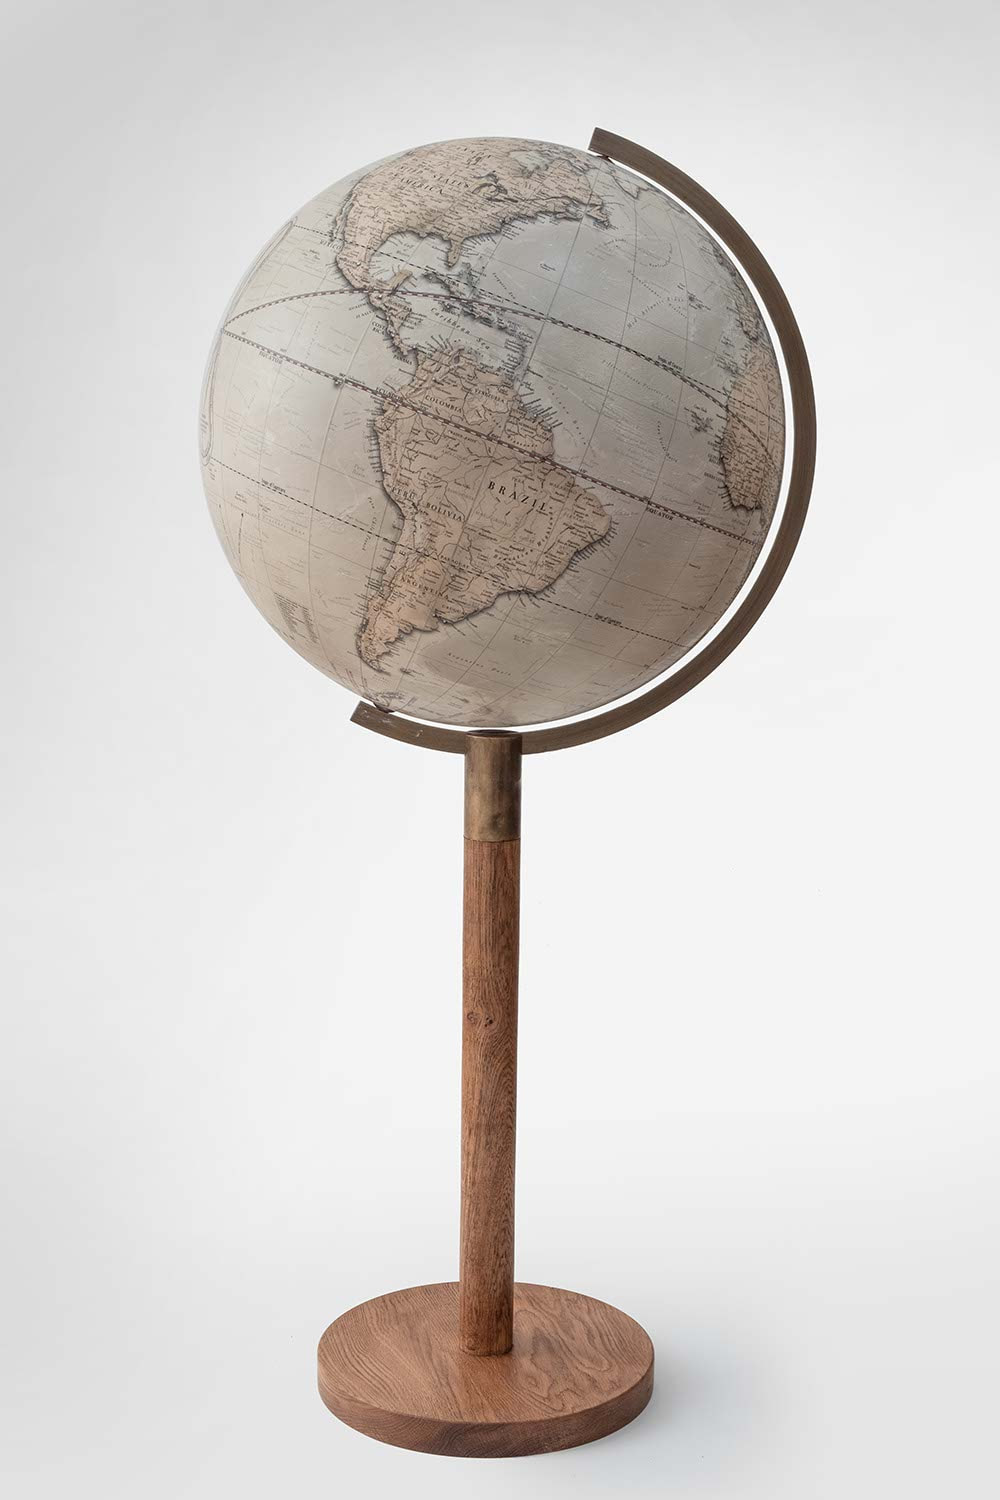 Heritage globe full length showing South America